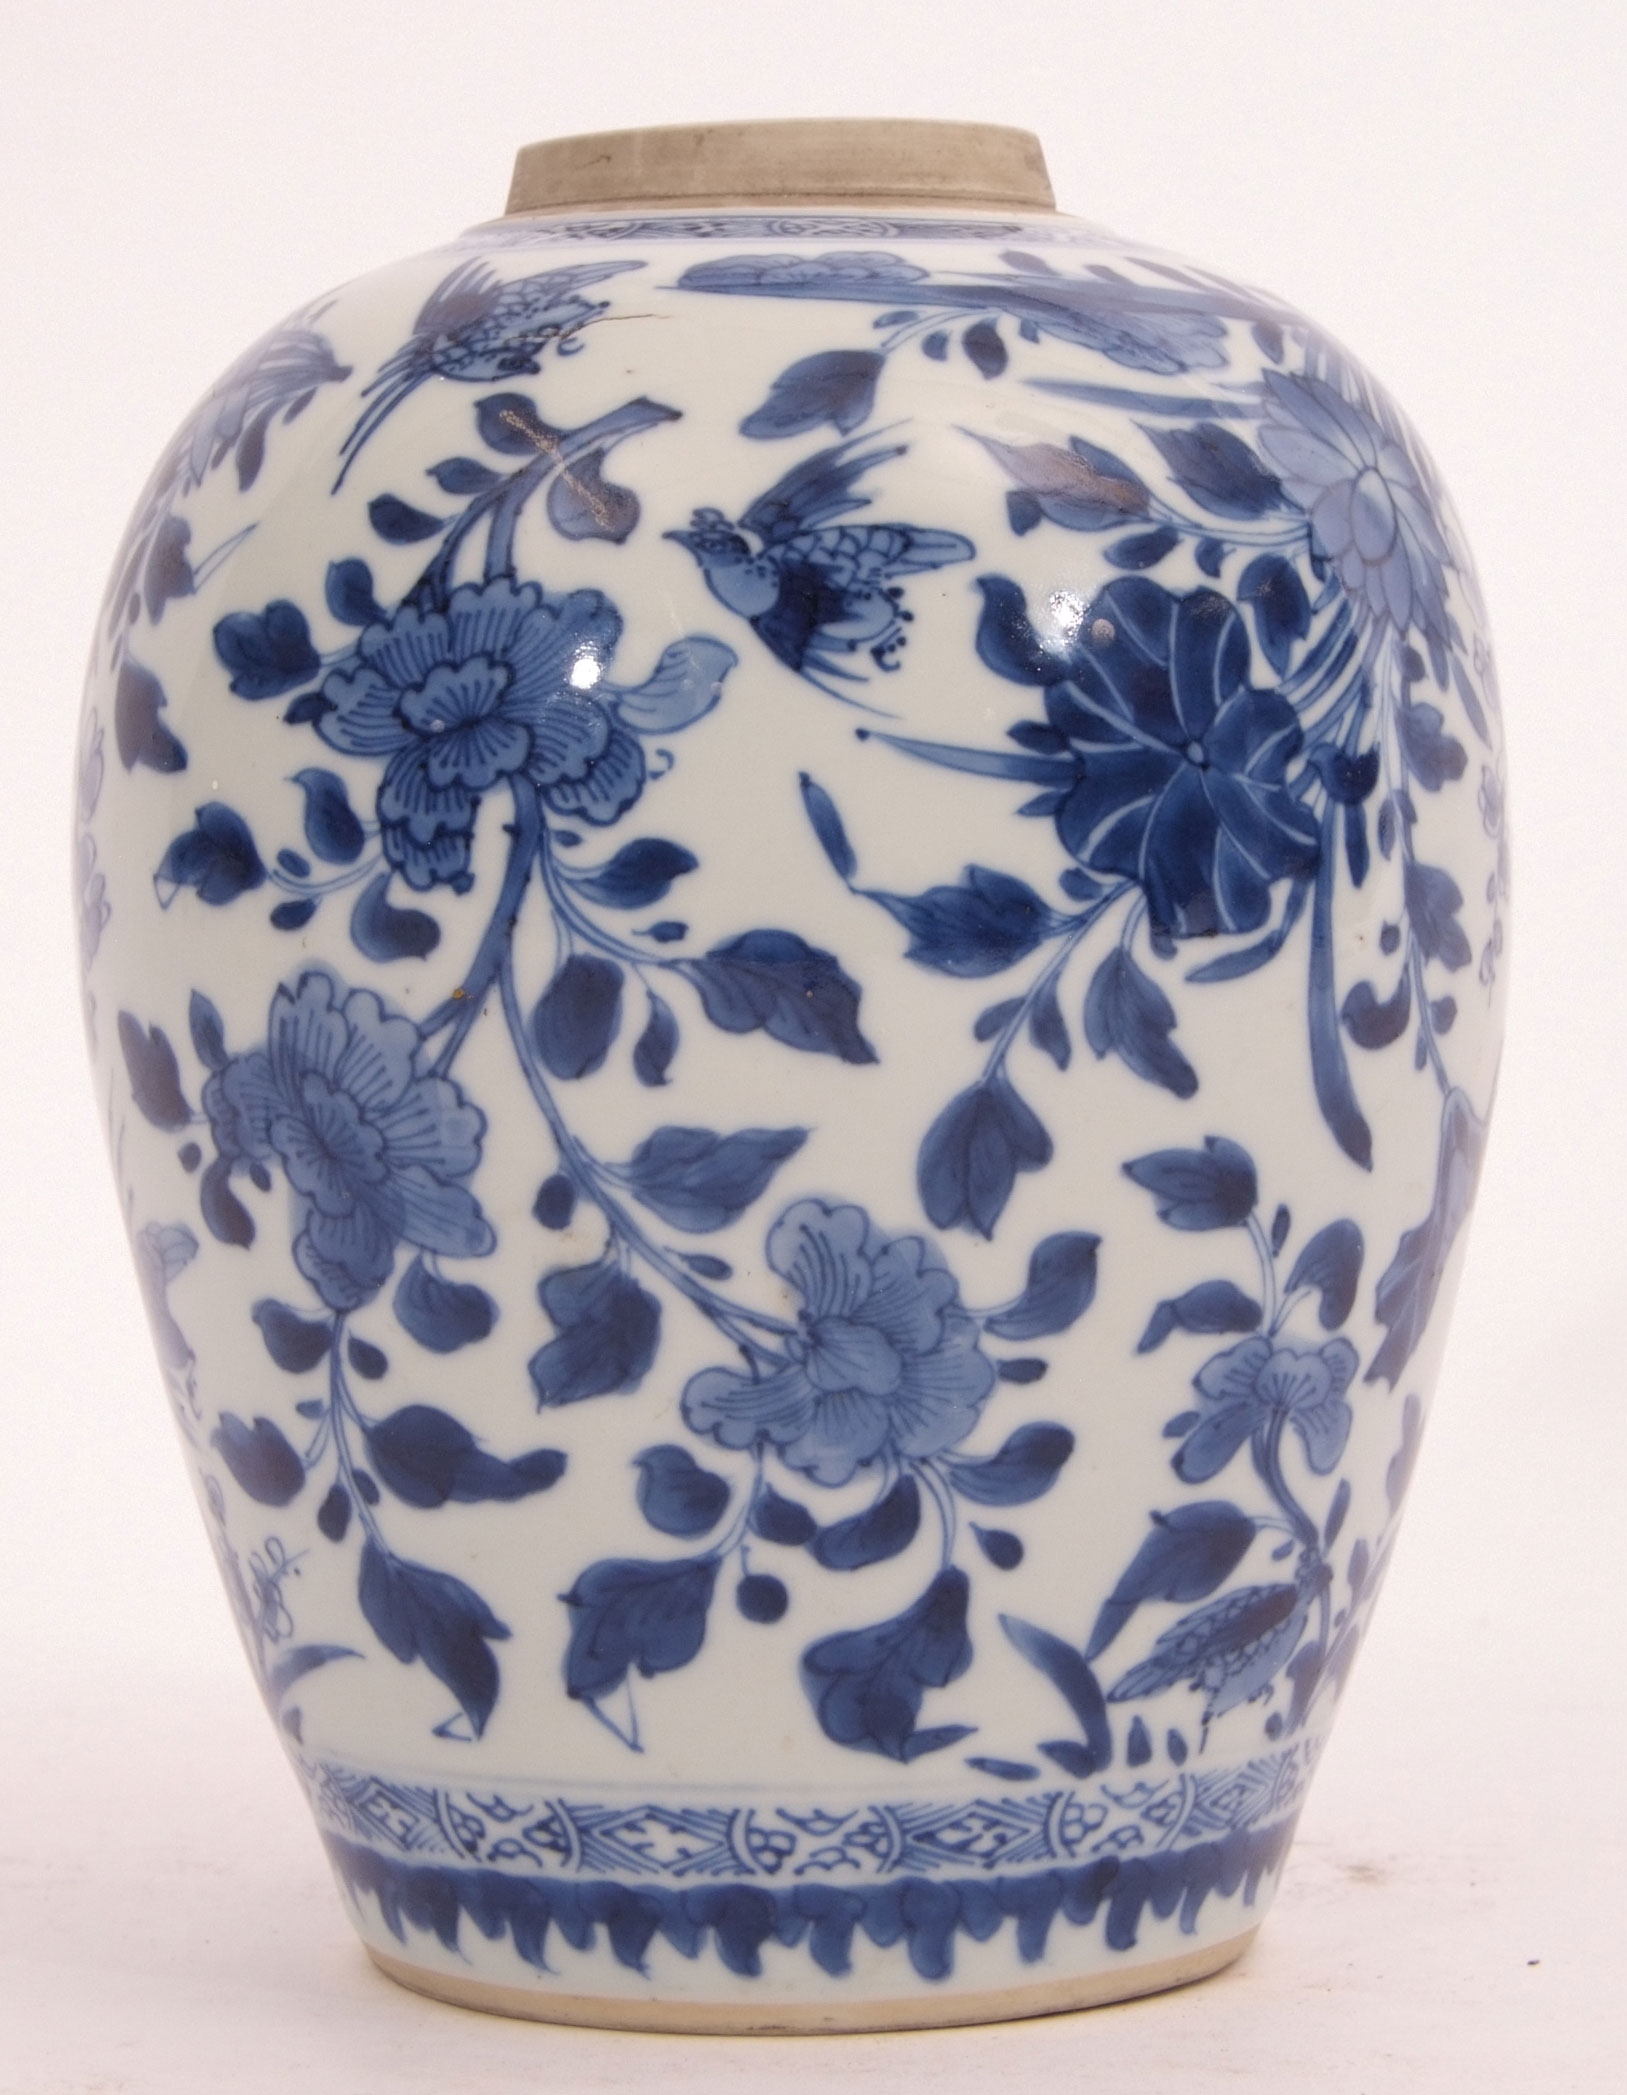 18th century Chinese porcelain ginger jar decorated in blue and white with Lotus and flowering - Image 2 of 5